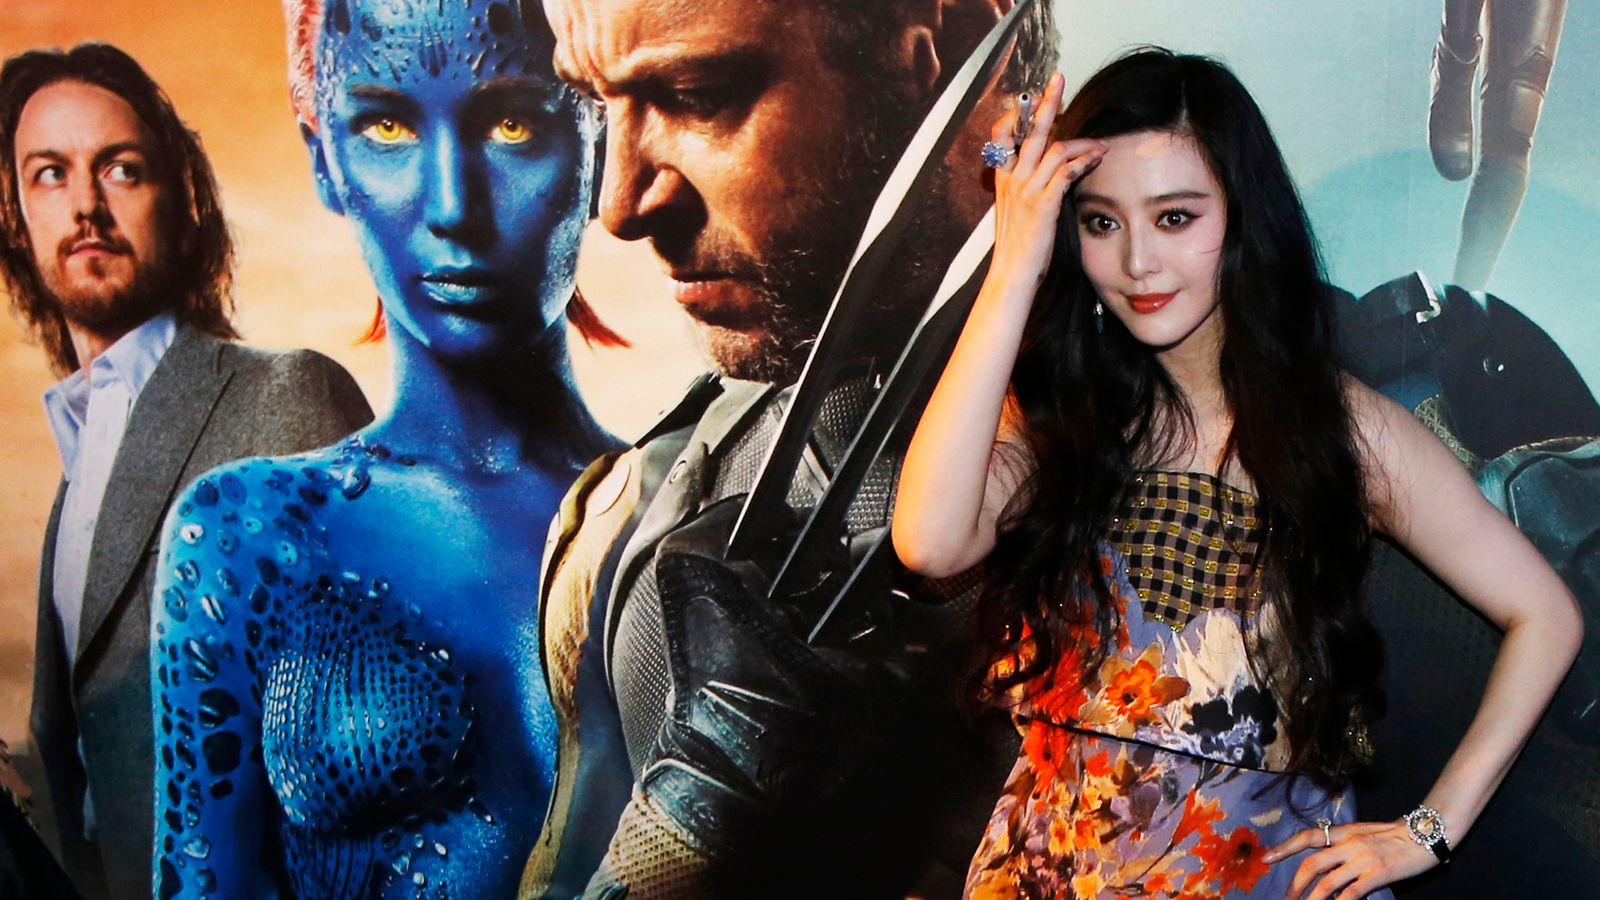 Missing X-Men actress Fan Bingbing reappears and ordered to pay £100m in taxes and fines | Ents & Arts News Sky News